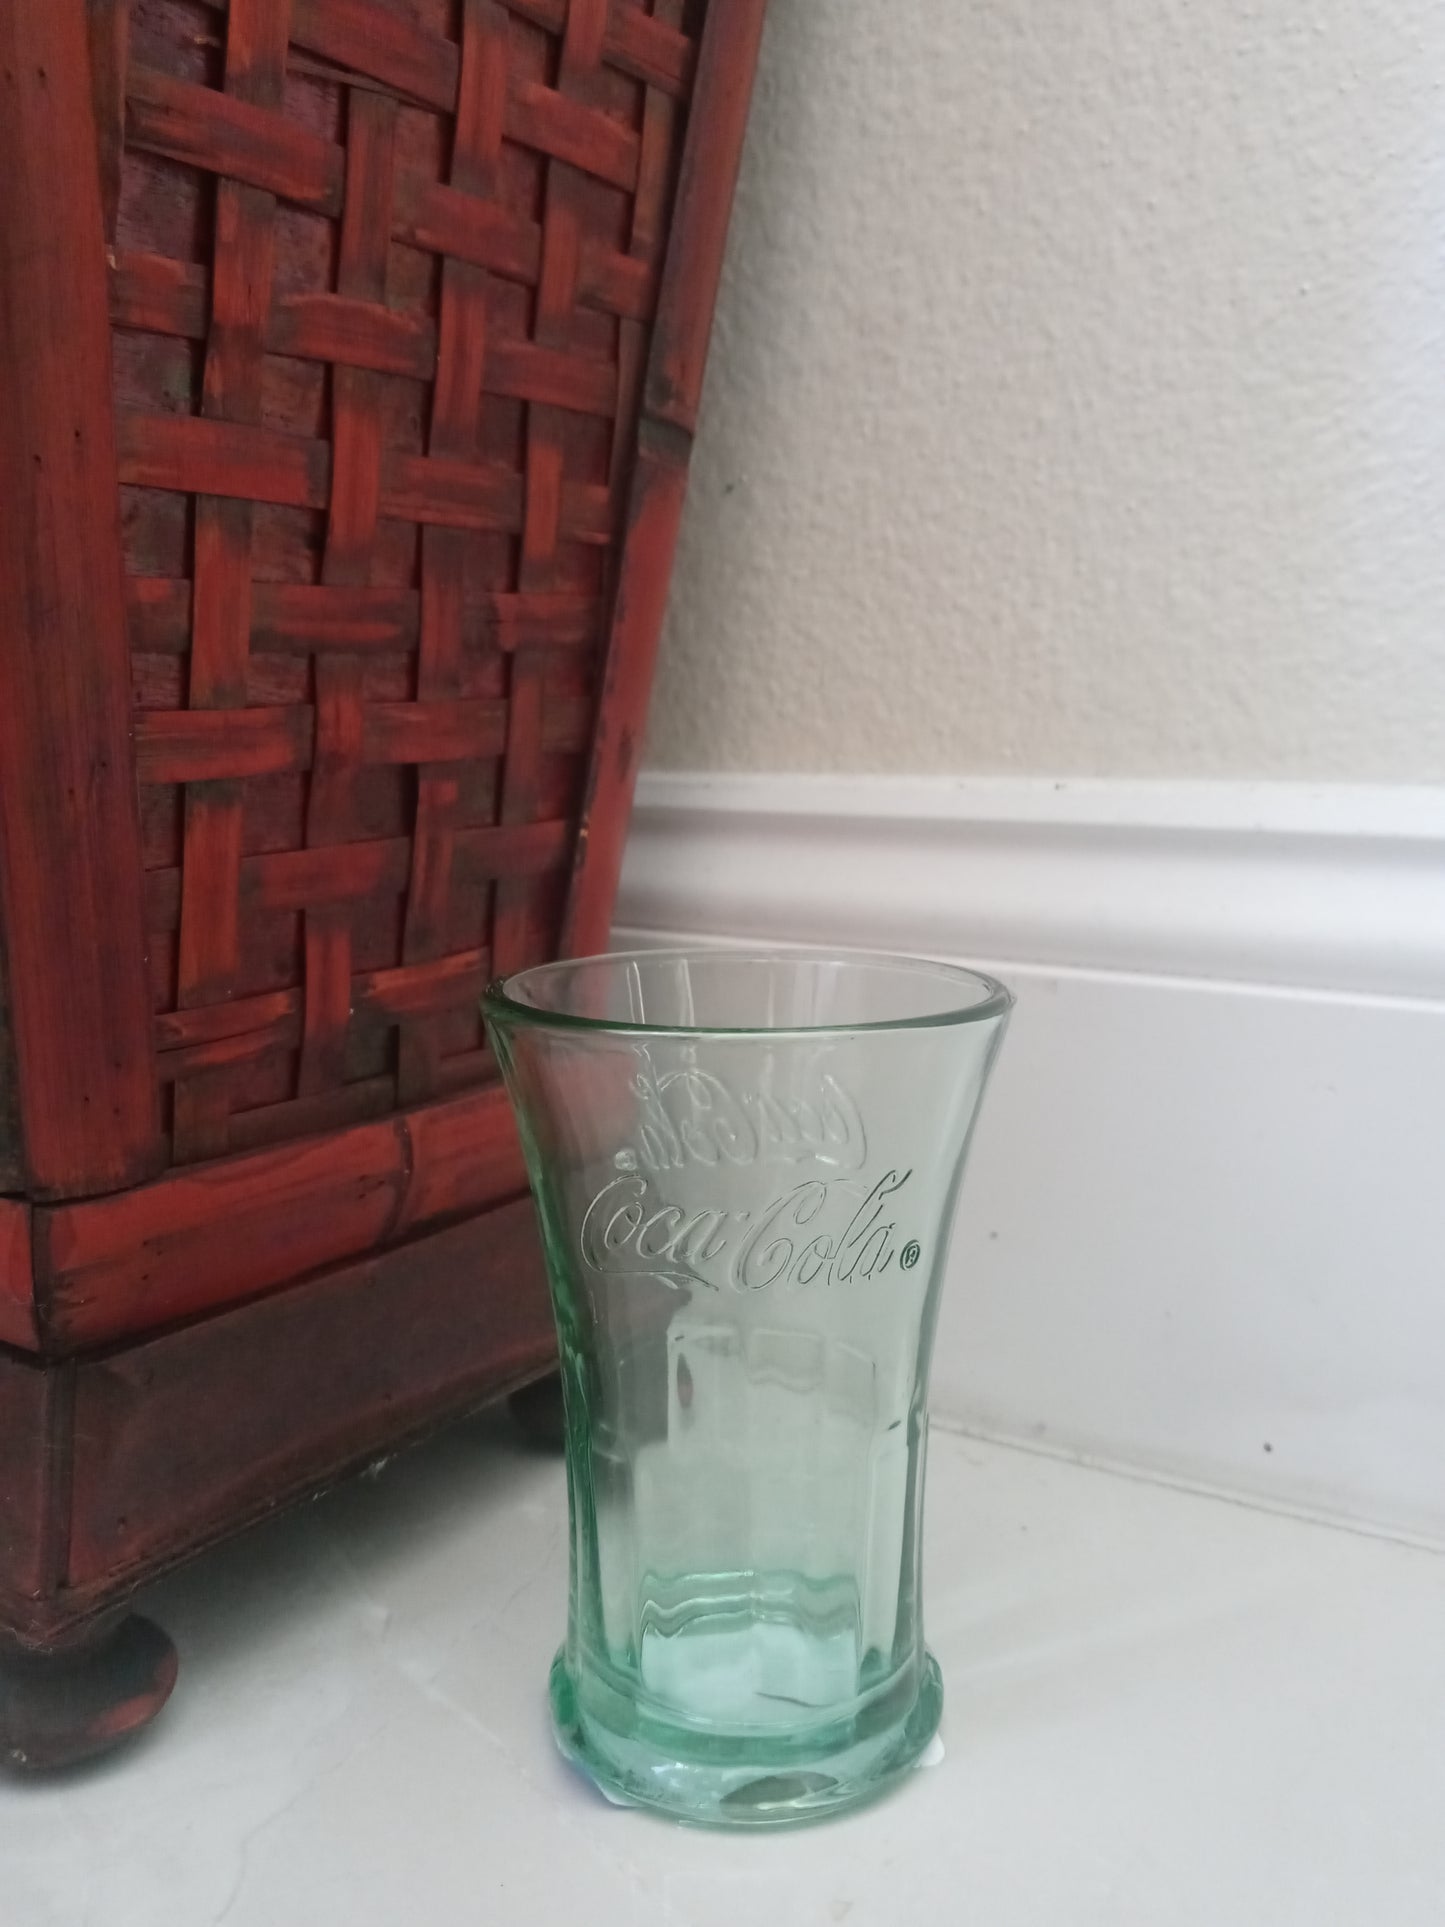 Vintage Green Tinted Coca Cola Glass Cup